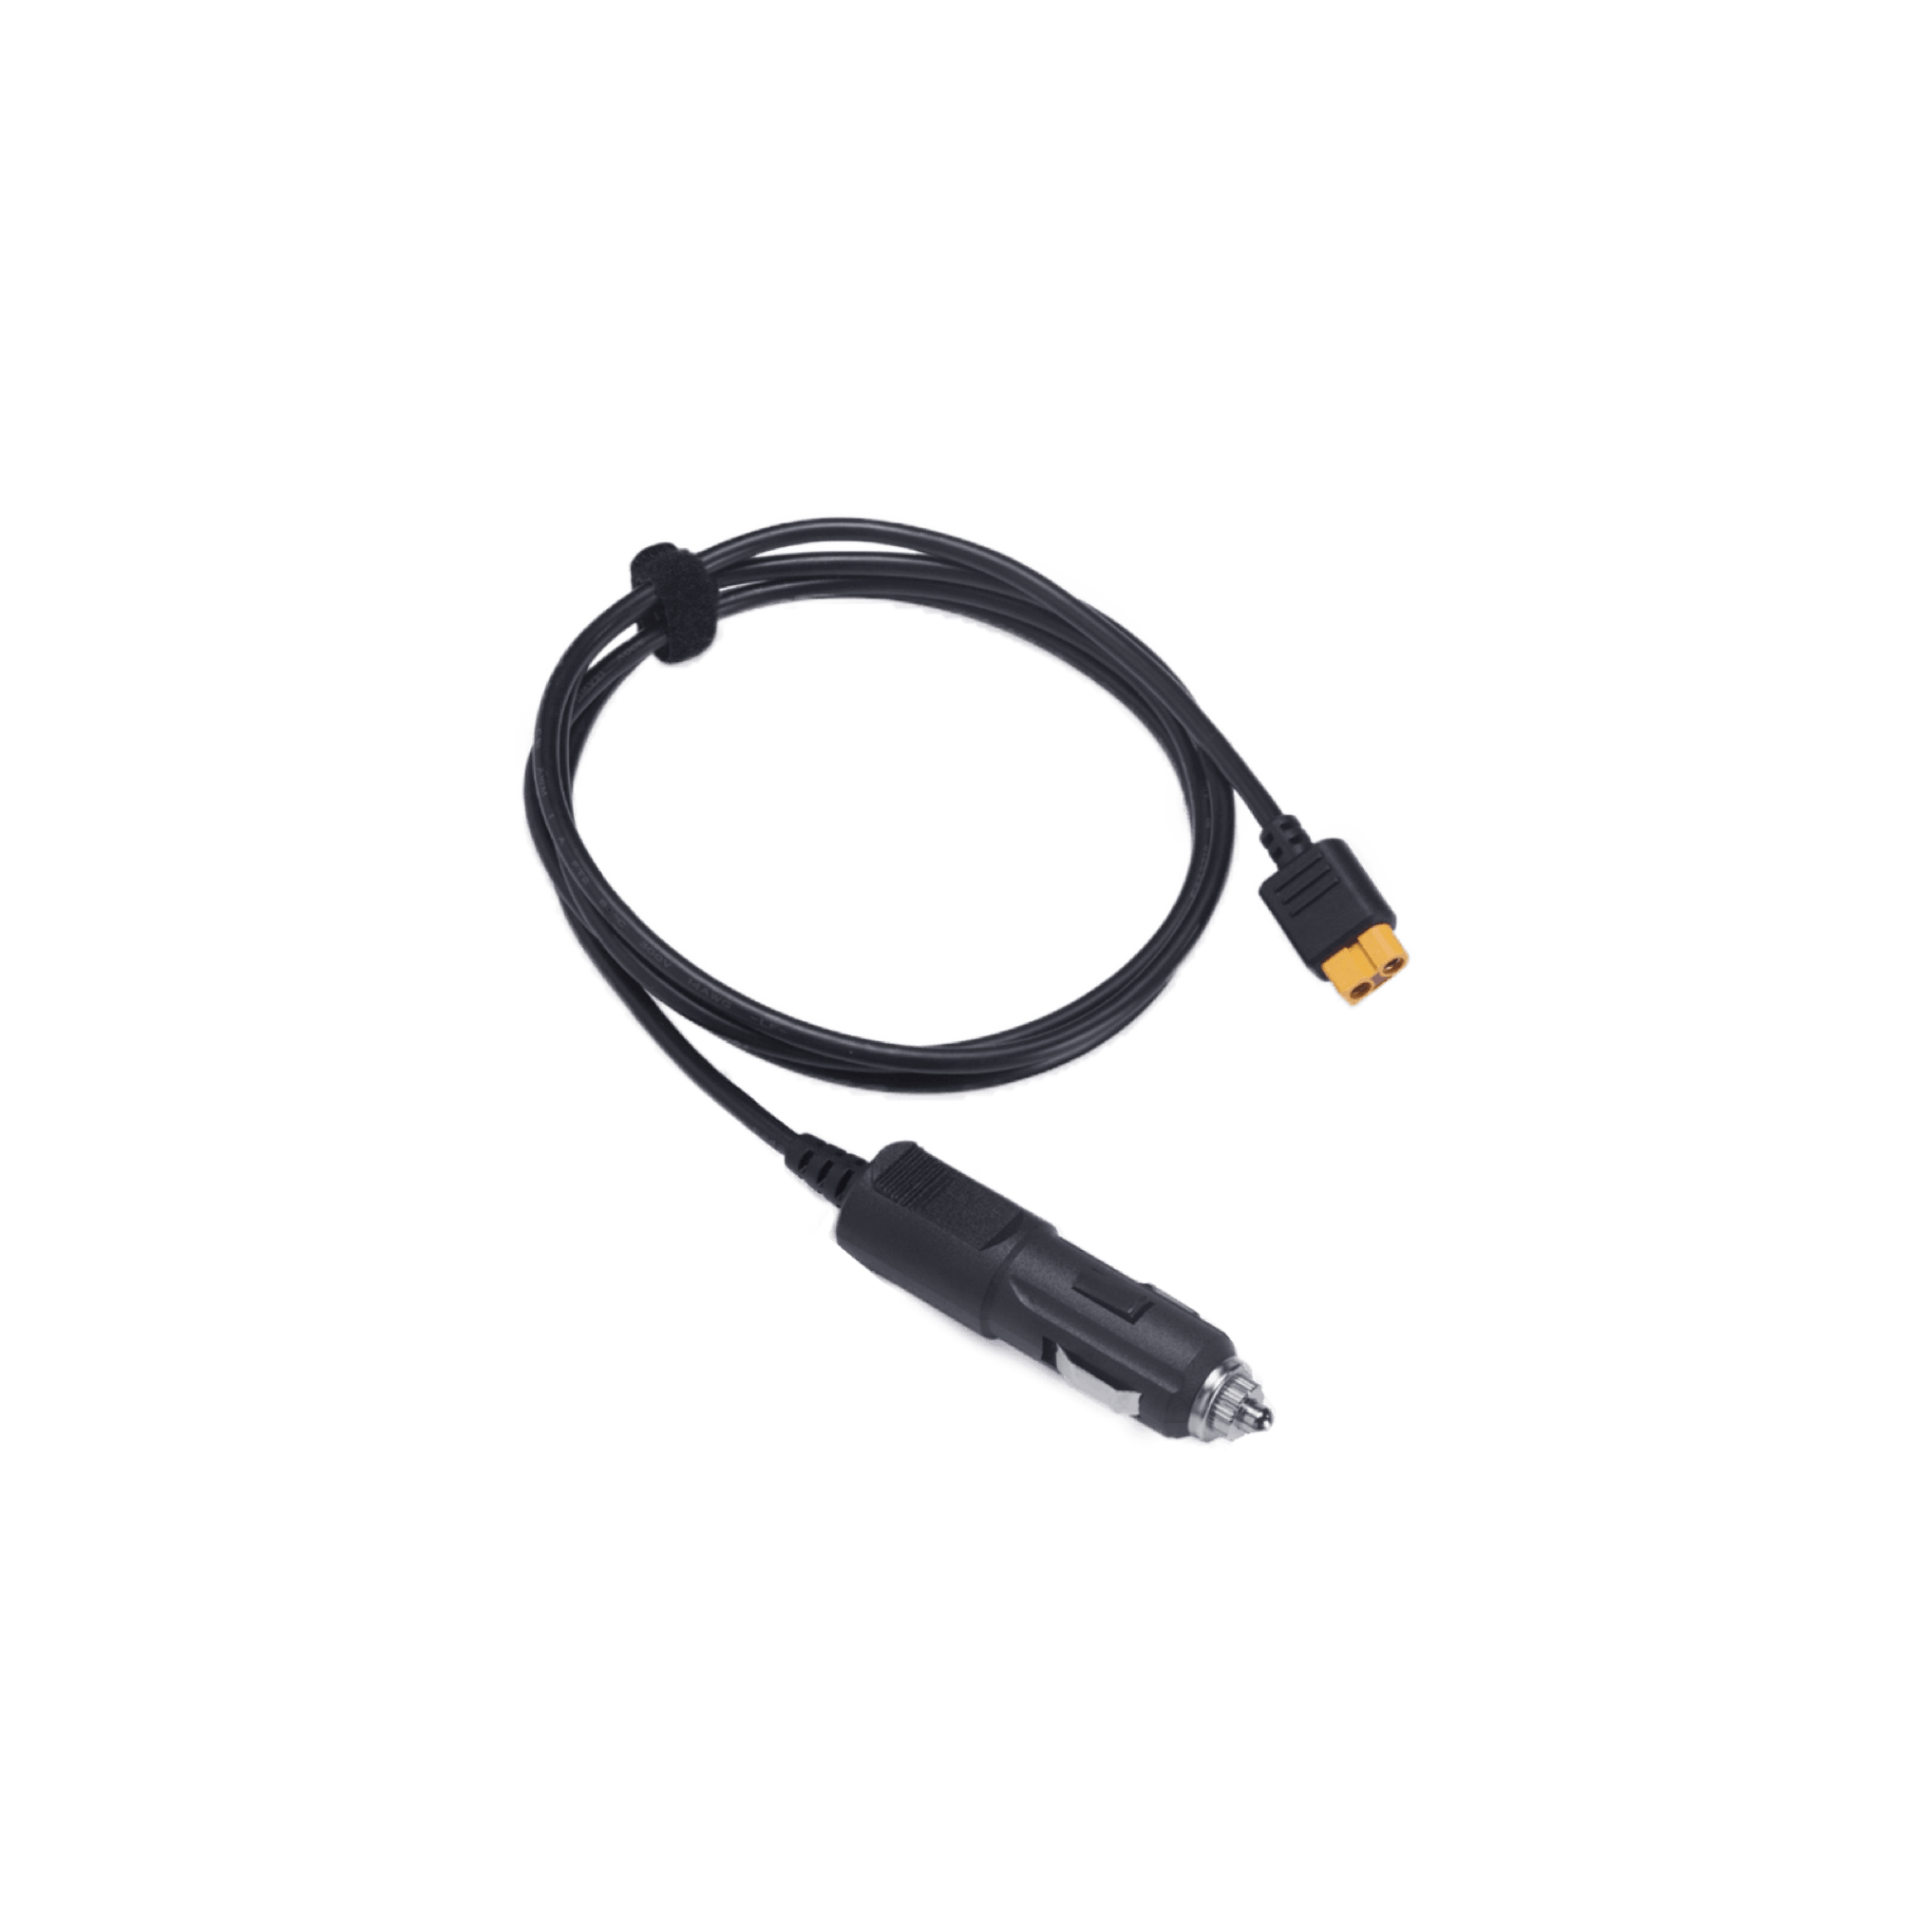 EcoFlow Car Charging Cable  - 12V 100W 240W - Compatible with River Max, Delta Max, and Delta Pro